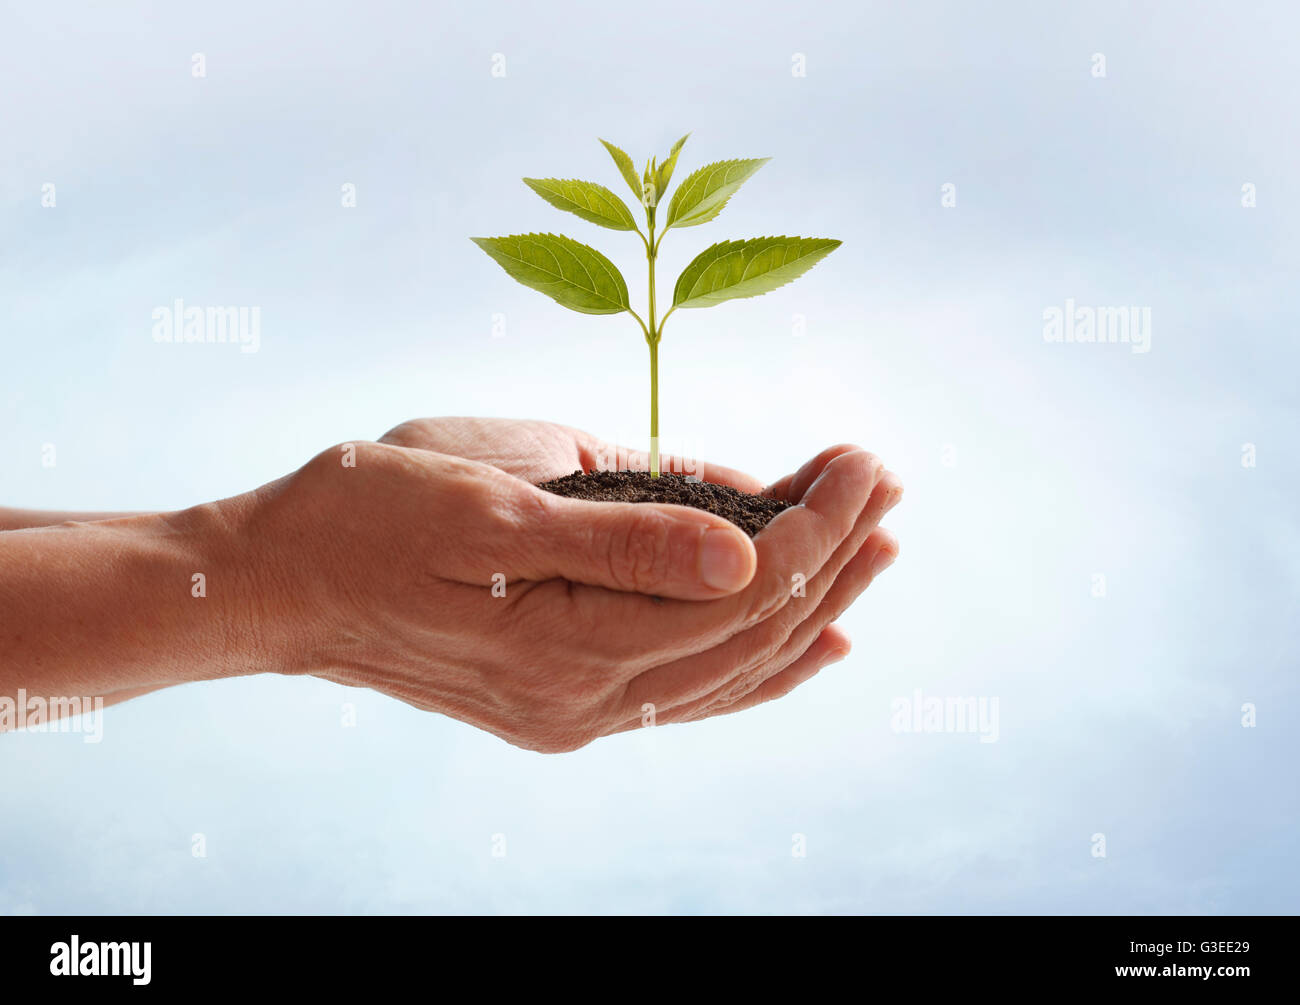 Hands holding a small plant Stock Photo